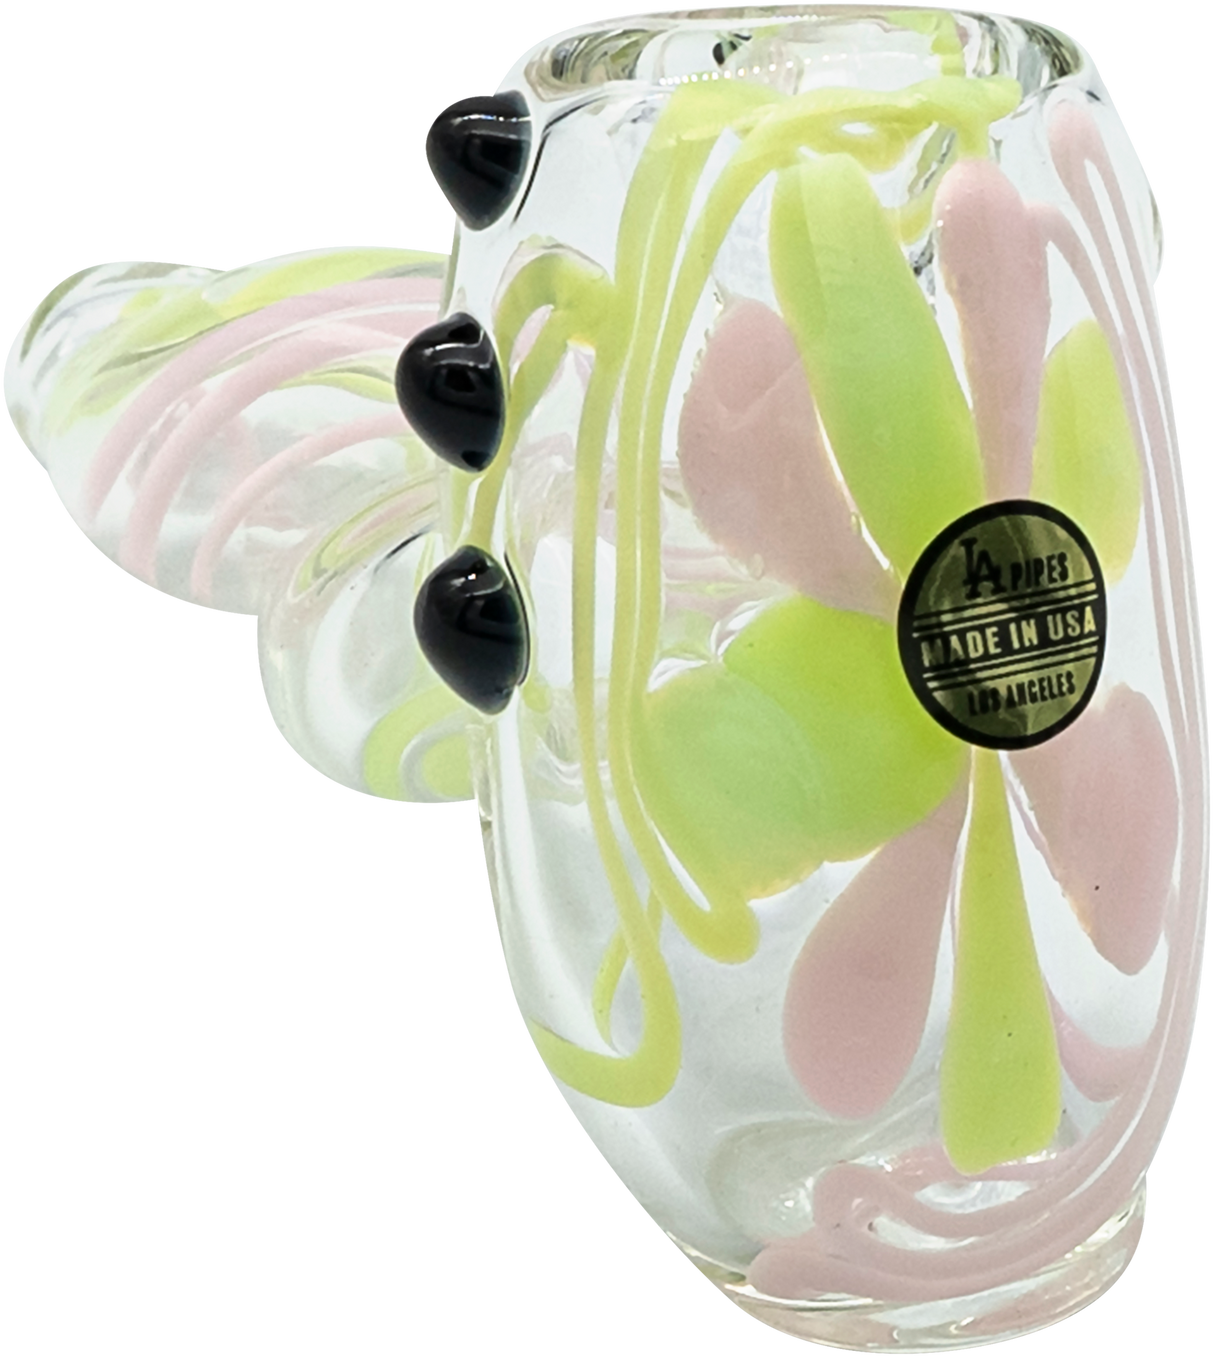 LA Pipes Hammer Pipe with Green Slyme & Bubble Gum Twist, 4.5" Borosilicate Glass, USA Made